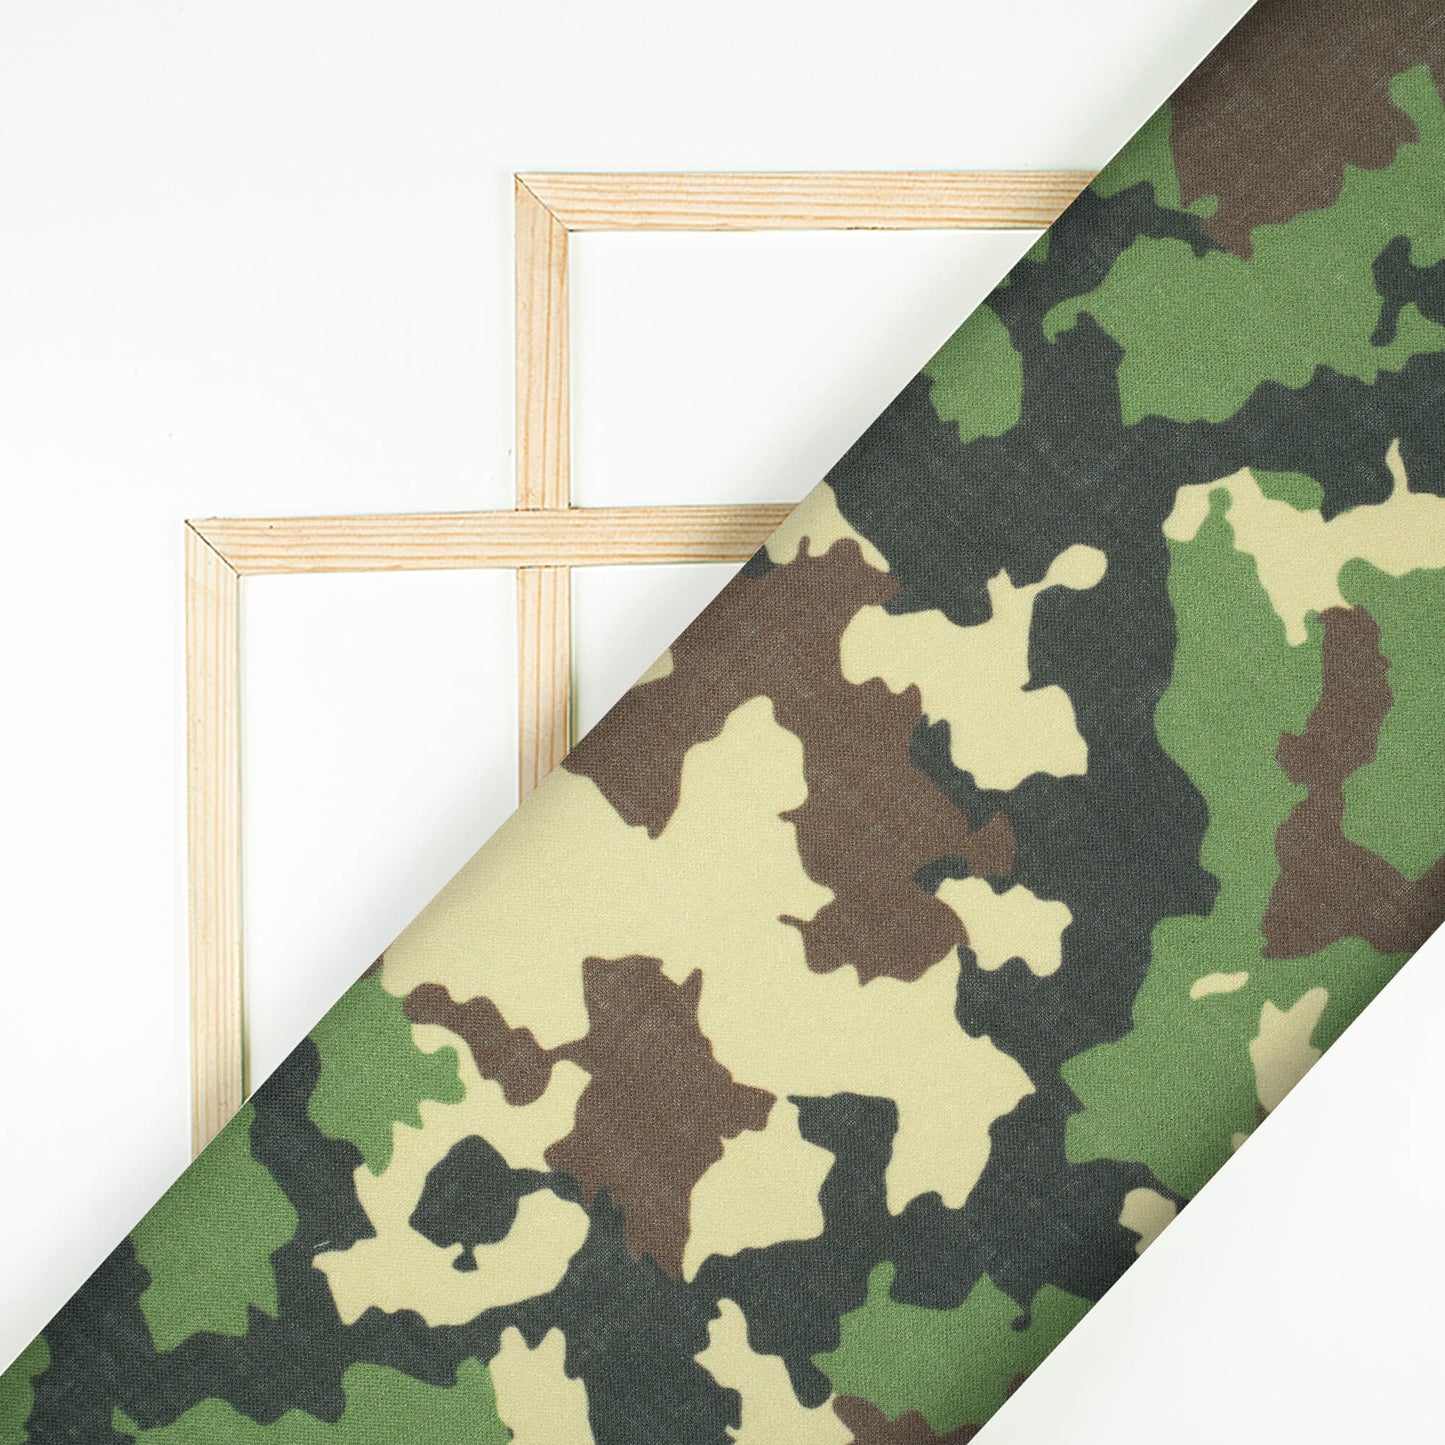 Army Green And Sepia Beige Camouflage Digital Print Linen Textured Fabric (Width 56 Inches) - Fabcurate